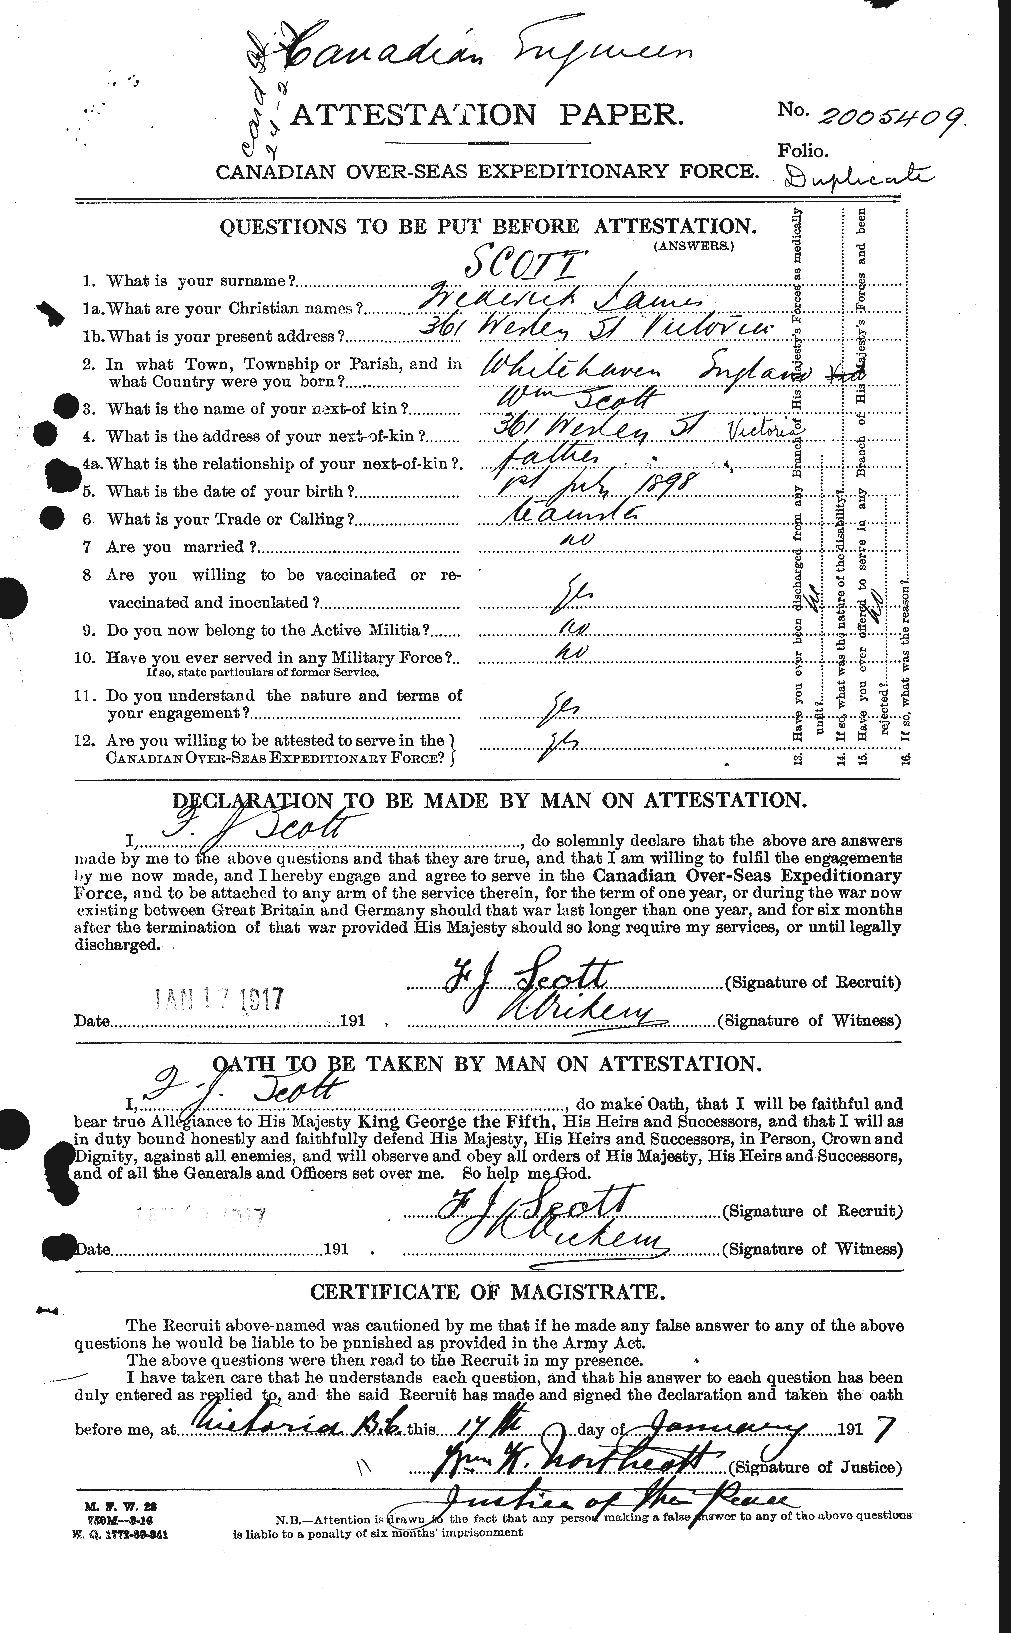 Personnel Records of the First World War - CEF 084387a